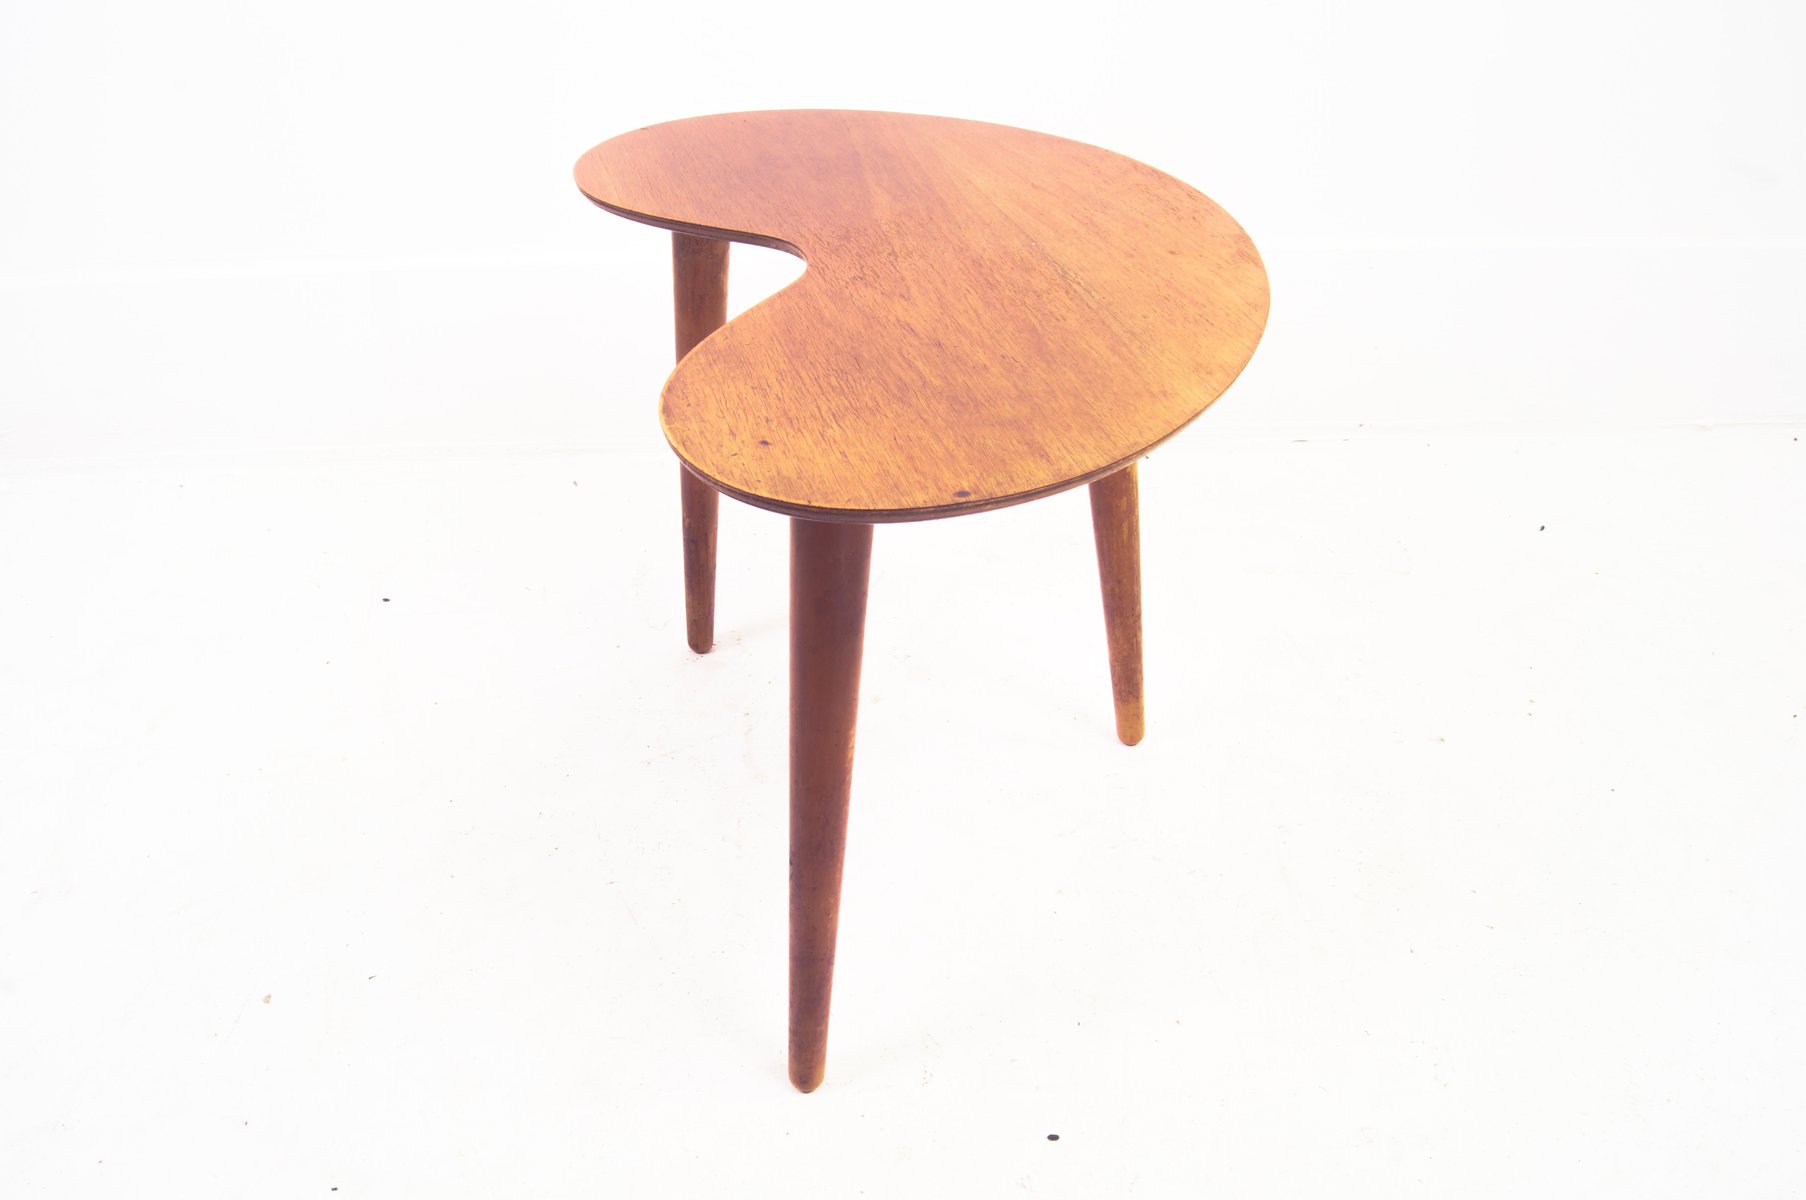 Teak Kidney-Shaped Side Table, 1960s for sale at Pamono